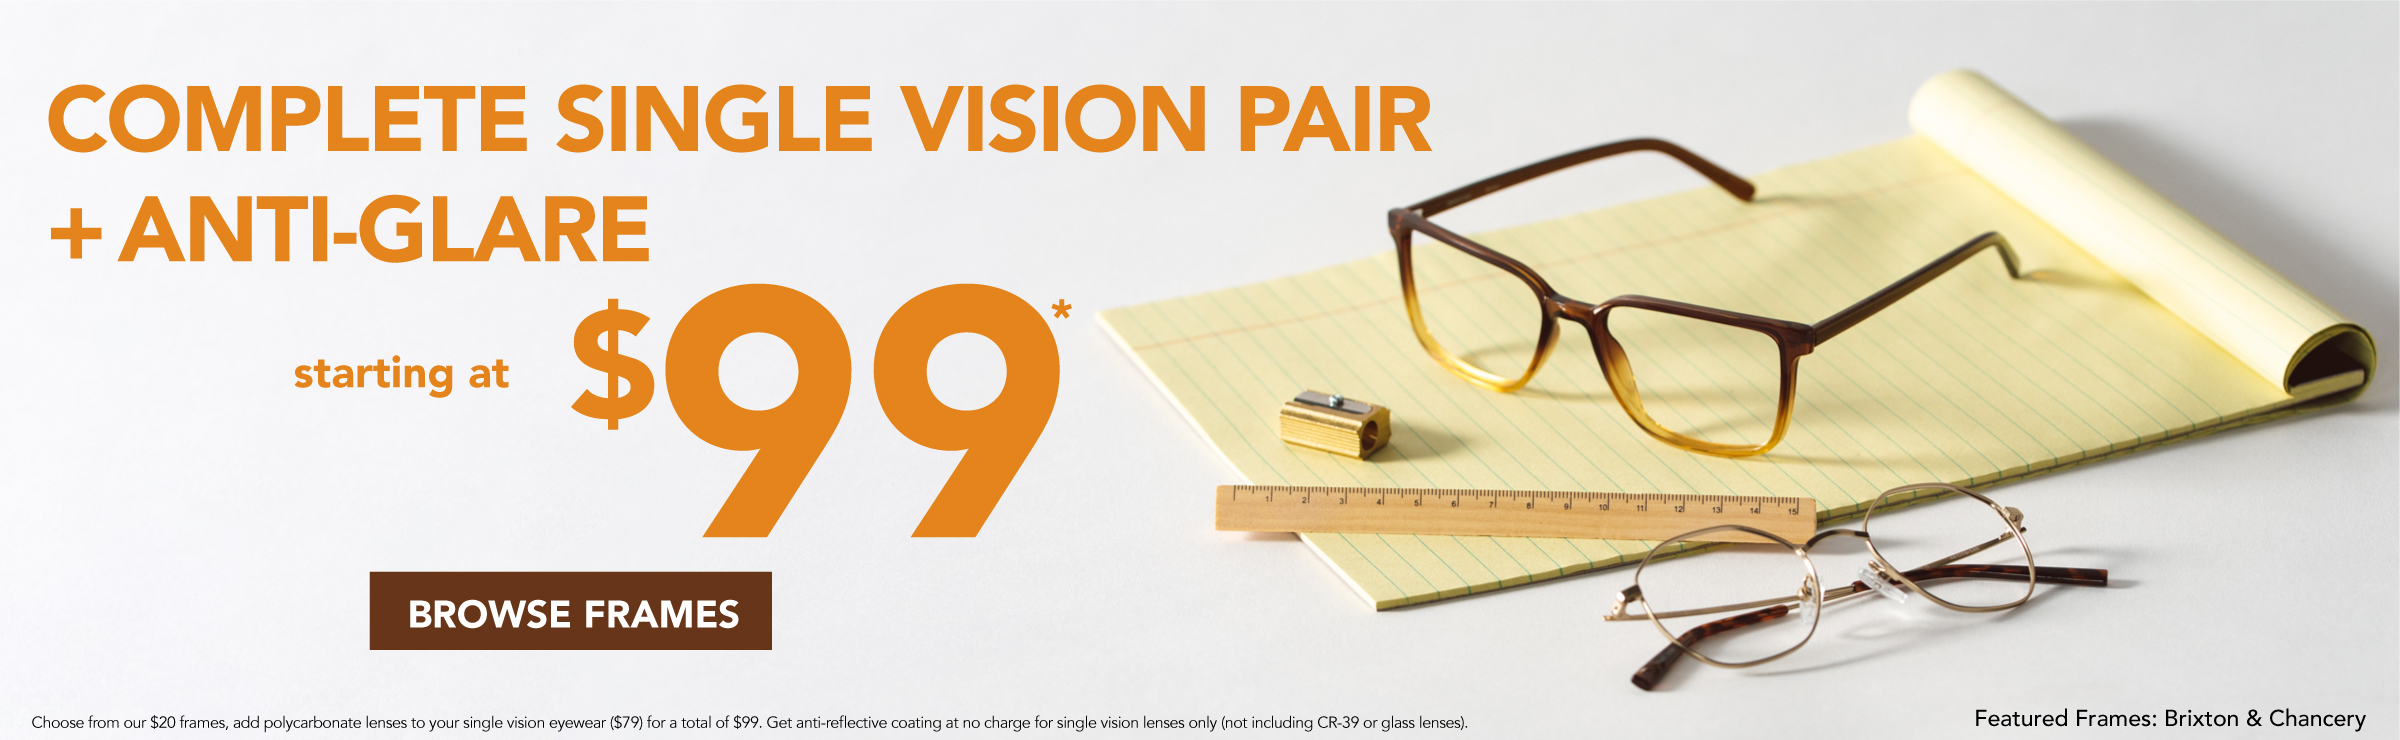 Single vision pair plus anti-glare is $99. Browse our frames.